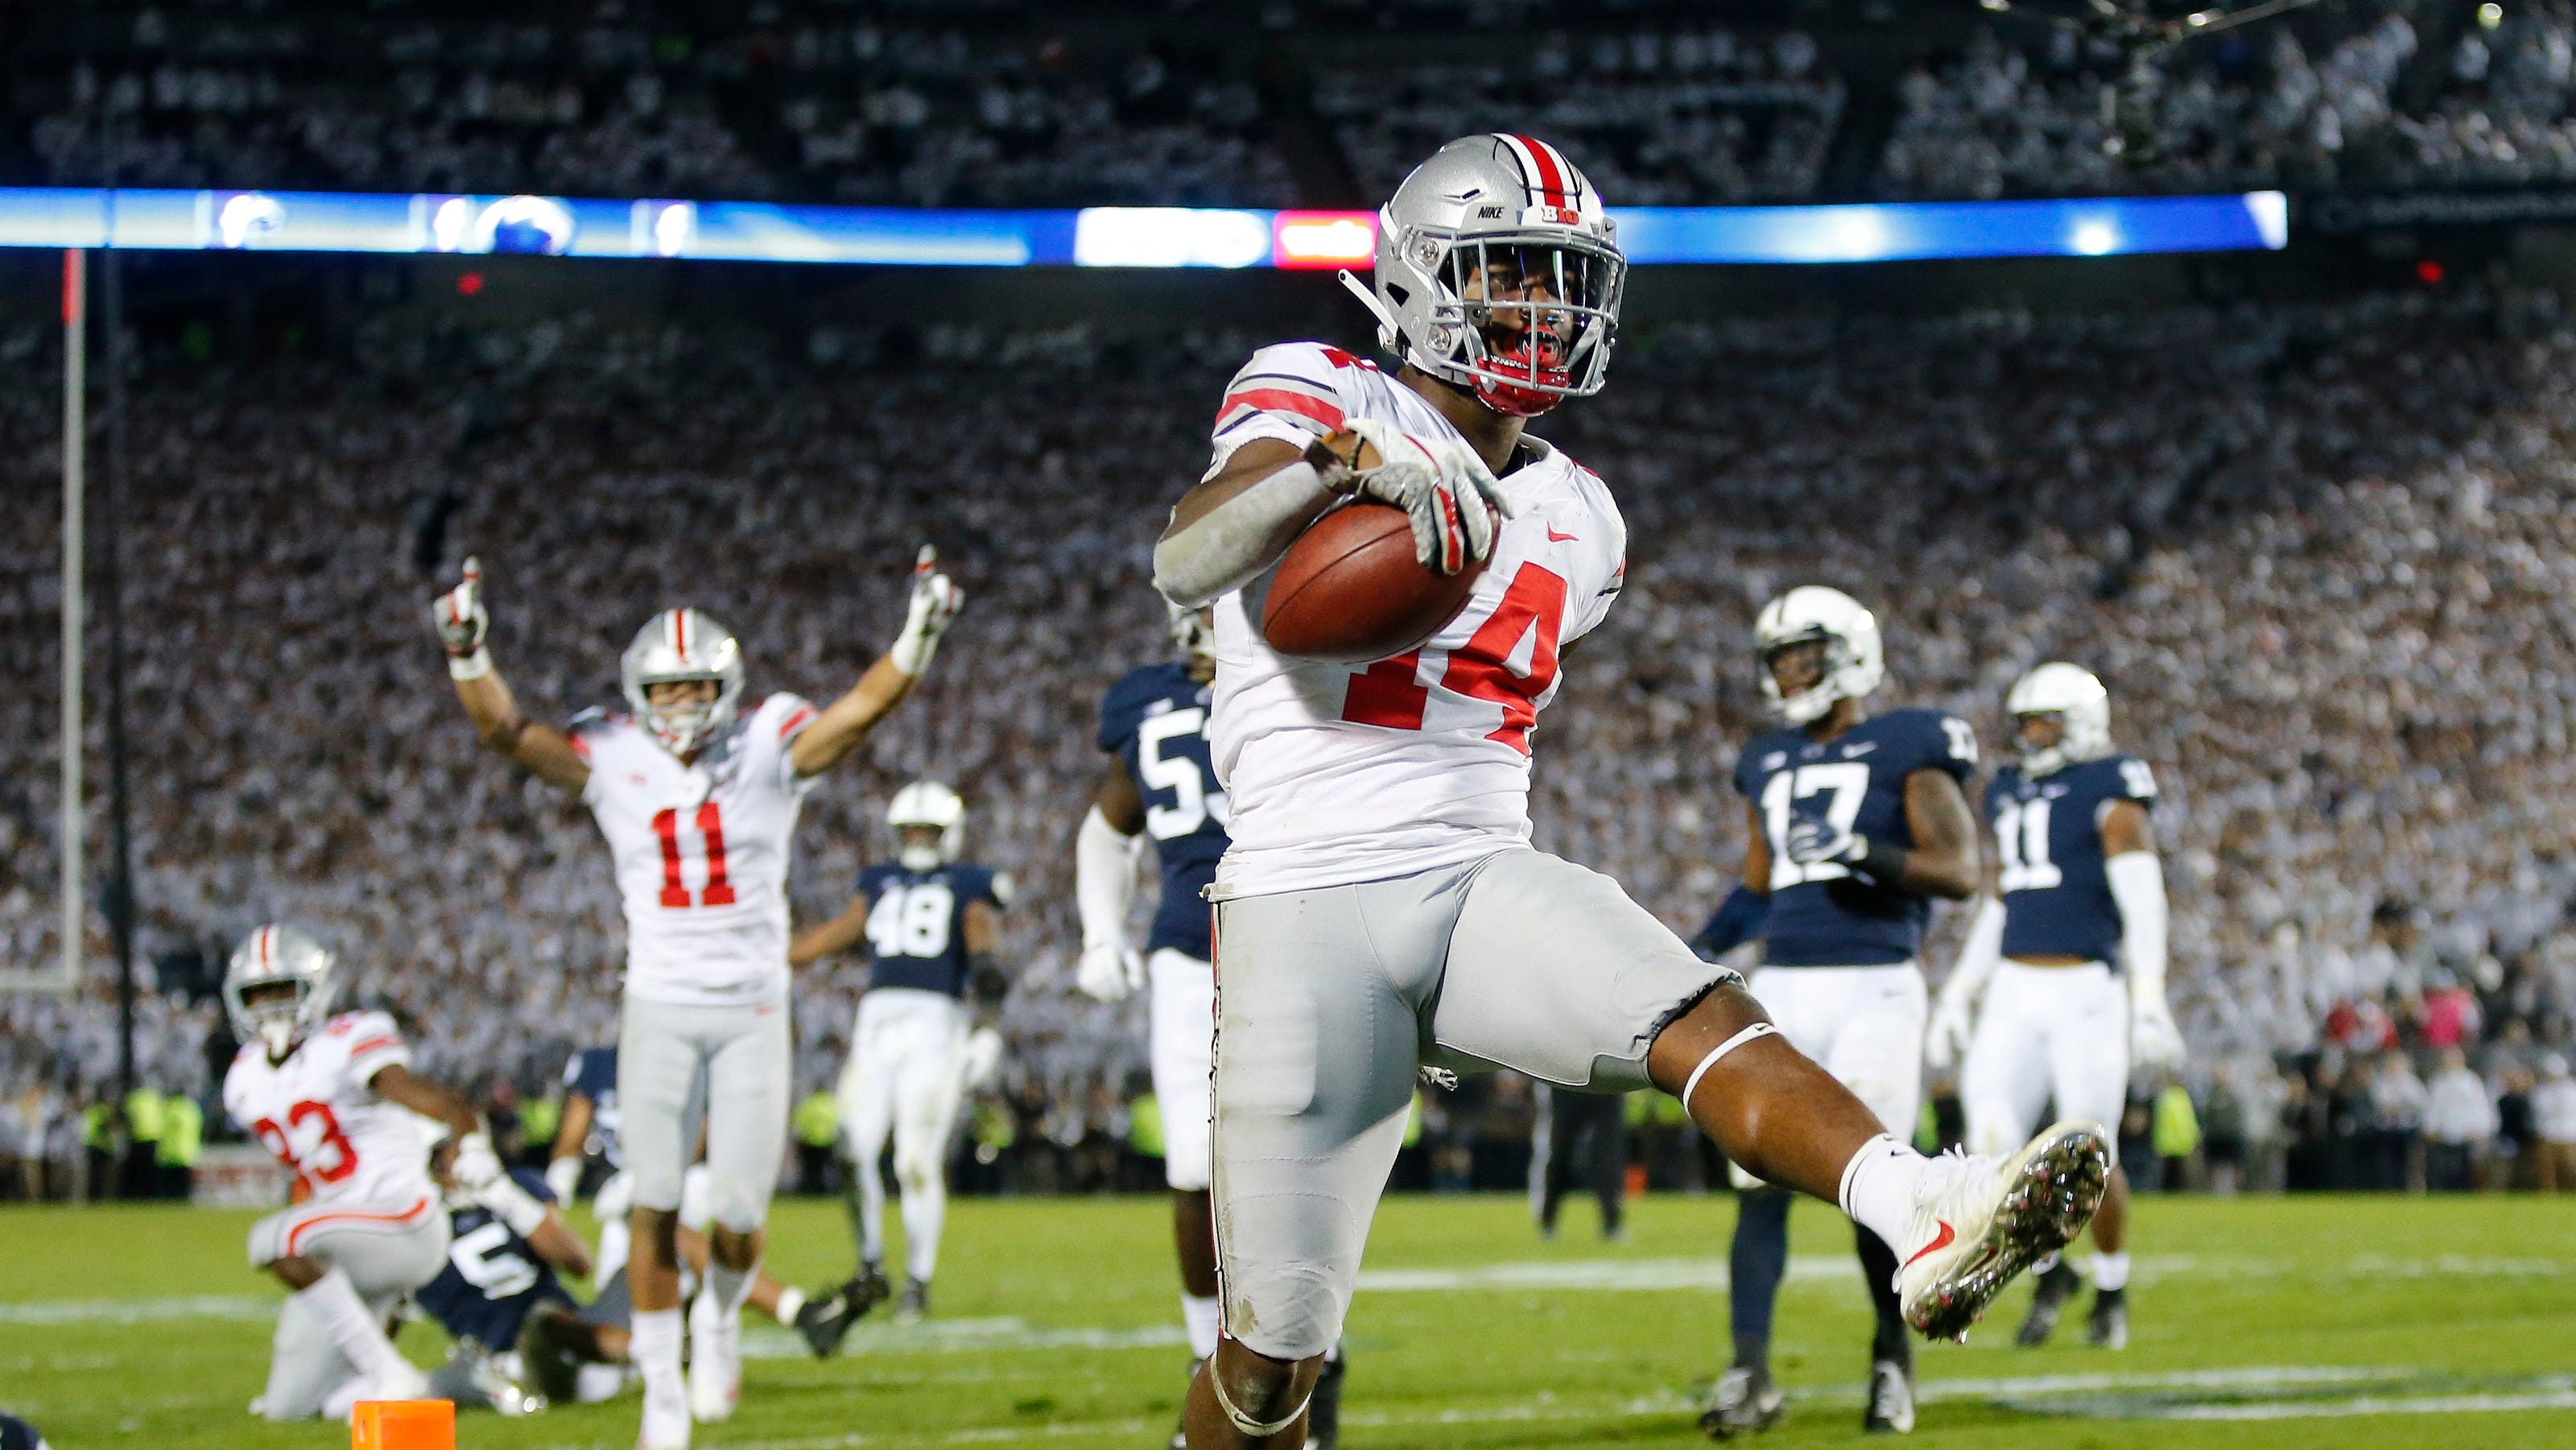 Ohio State football Follow the Penn State game with live scores and